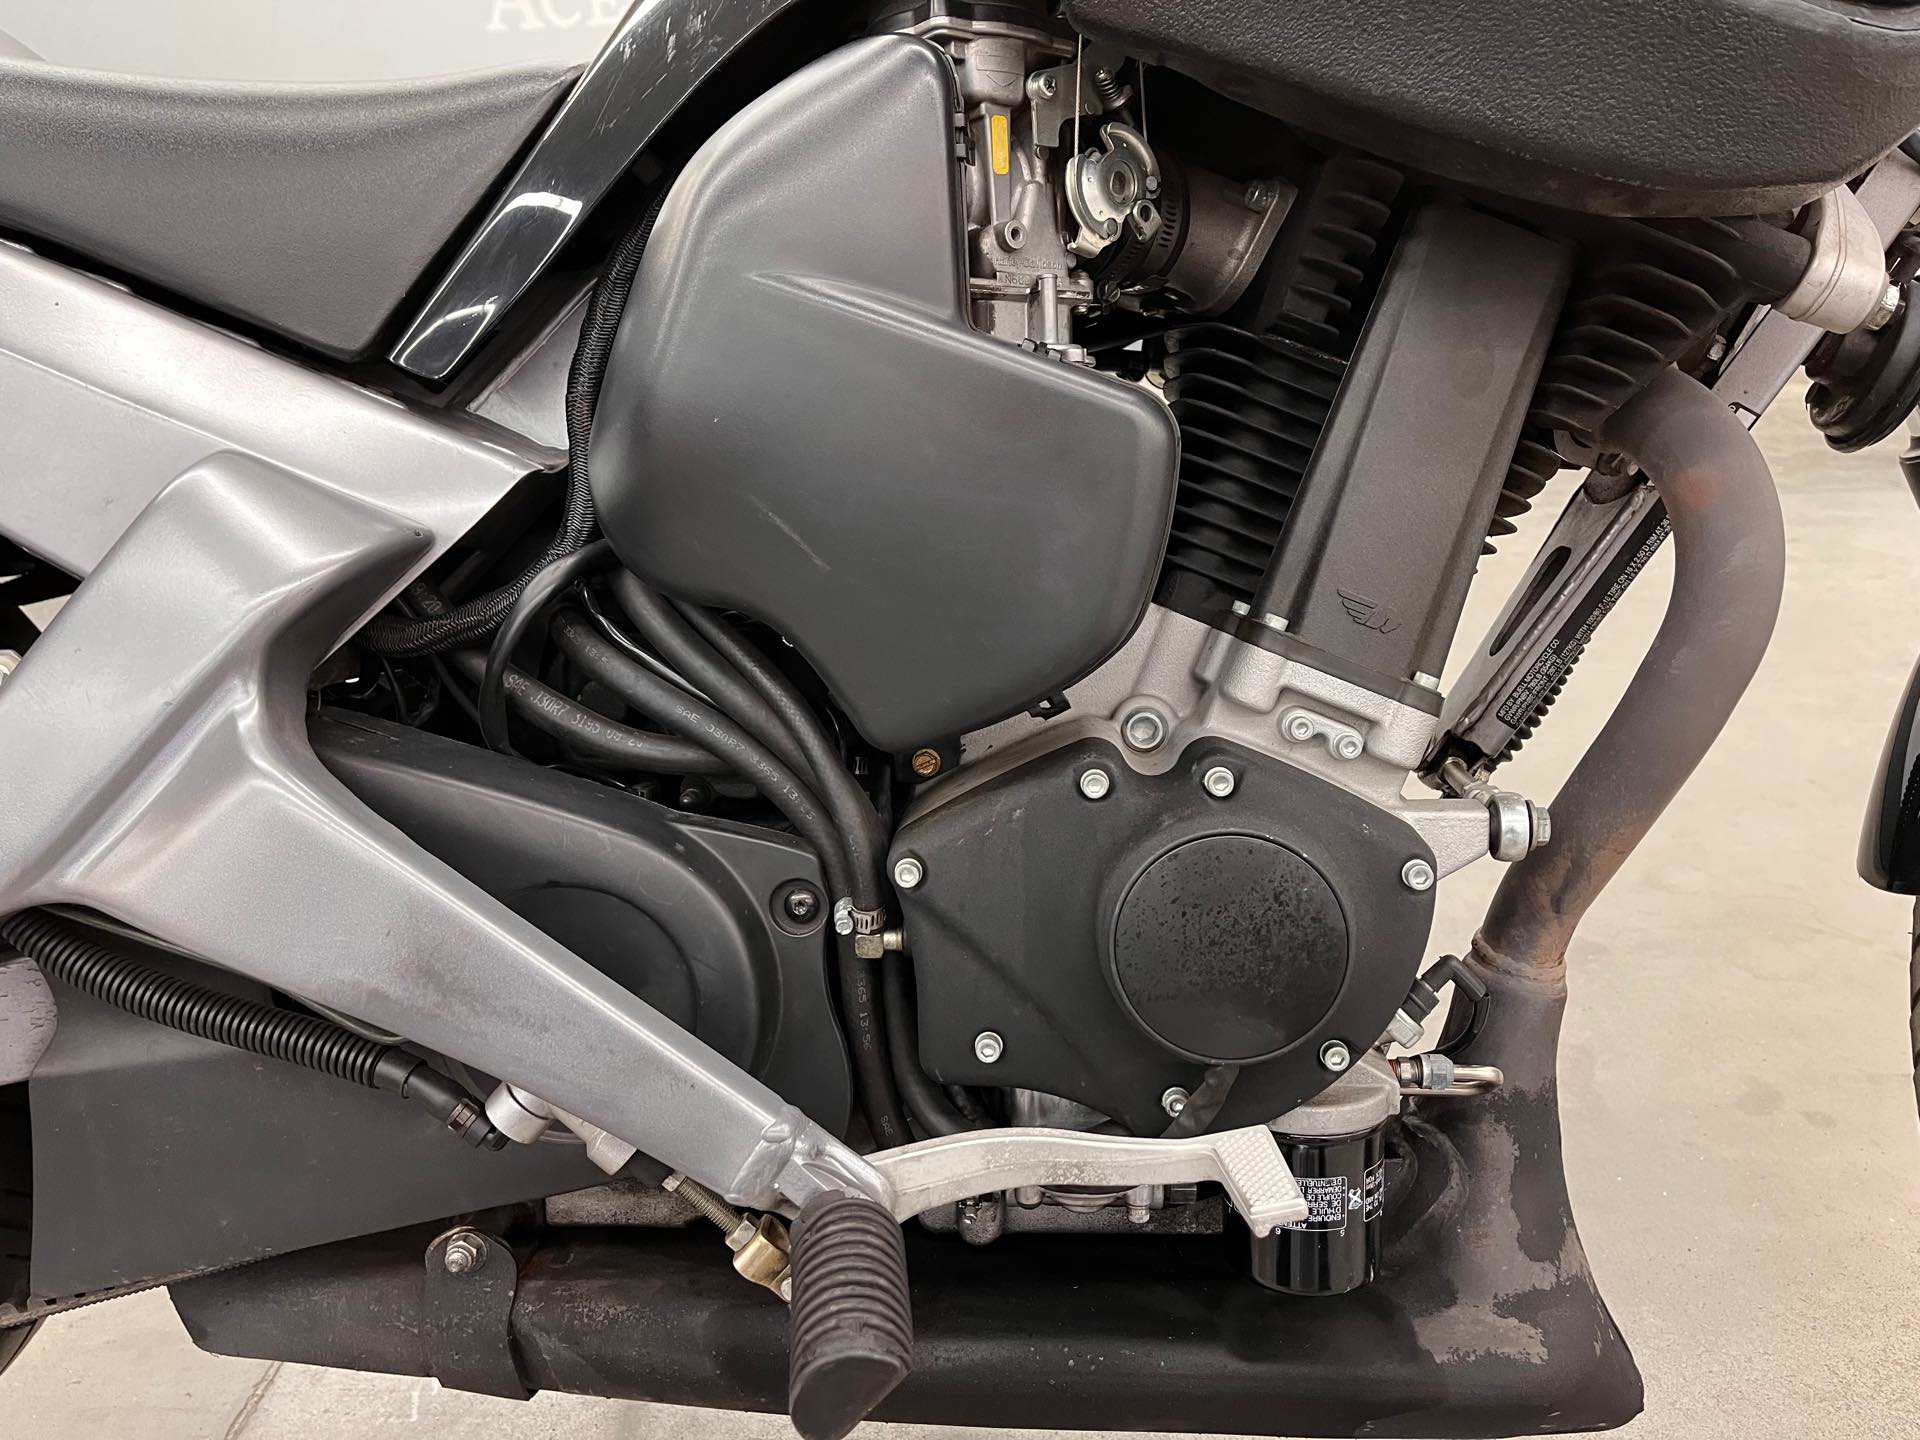 2006 Buell Blast Base at Aces Motorcycles - Denver